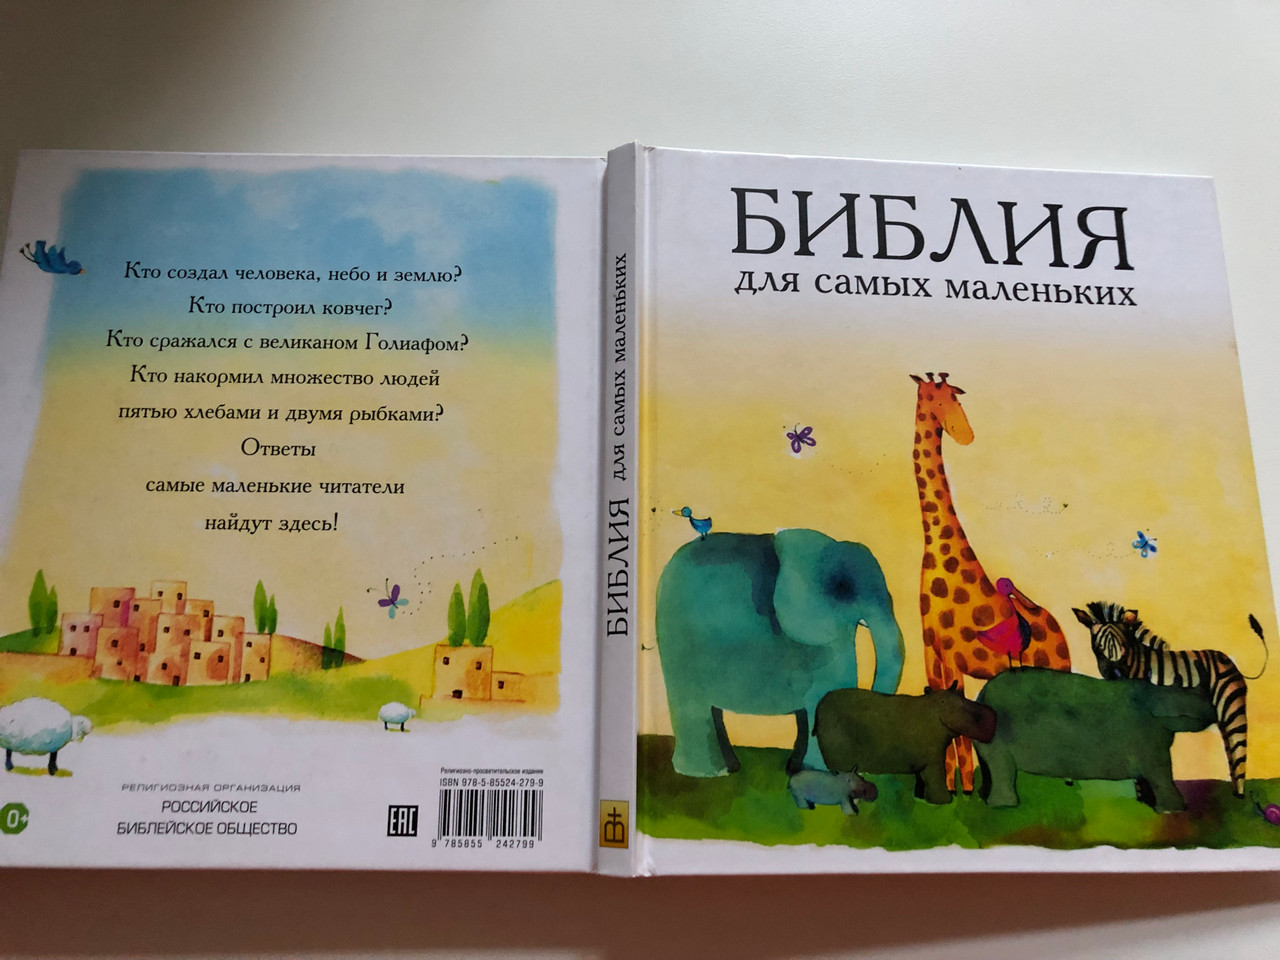 https://cdn10.bigcommerce.com/s-62bdpkt7pb/products/51169/images/260532/Russian_edition_of_A_Childs_Bible_17__30108.1670699399.1280.1280.JPG?c=2